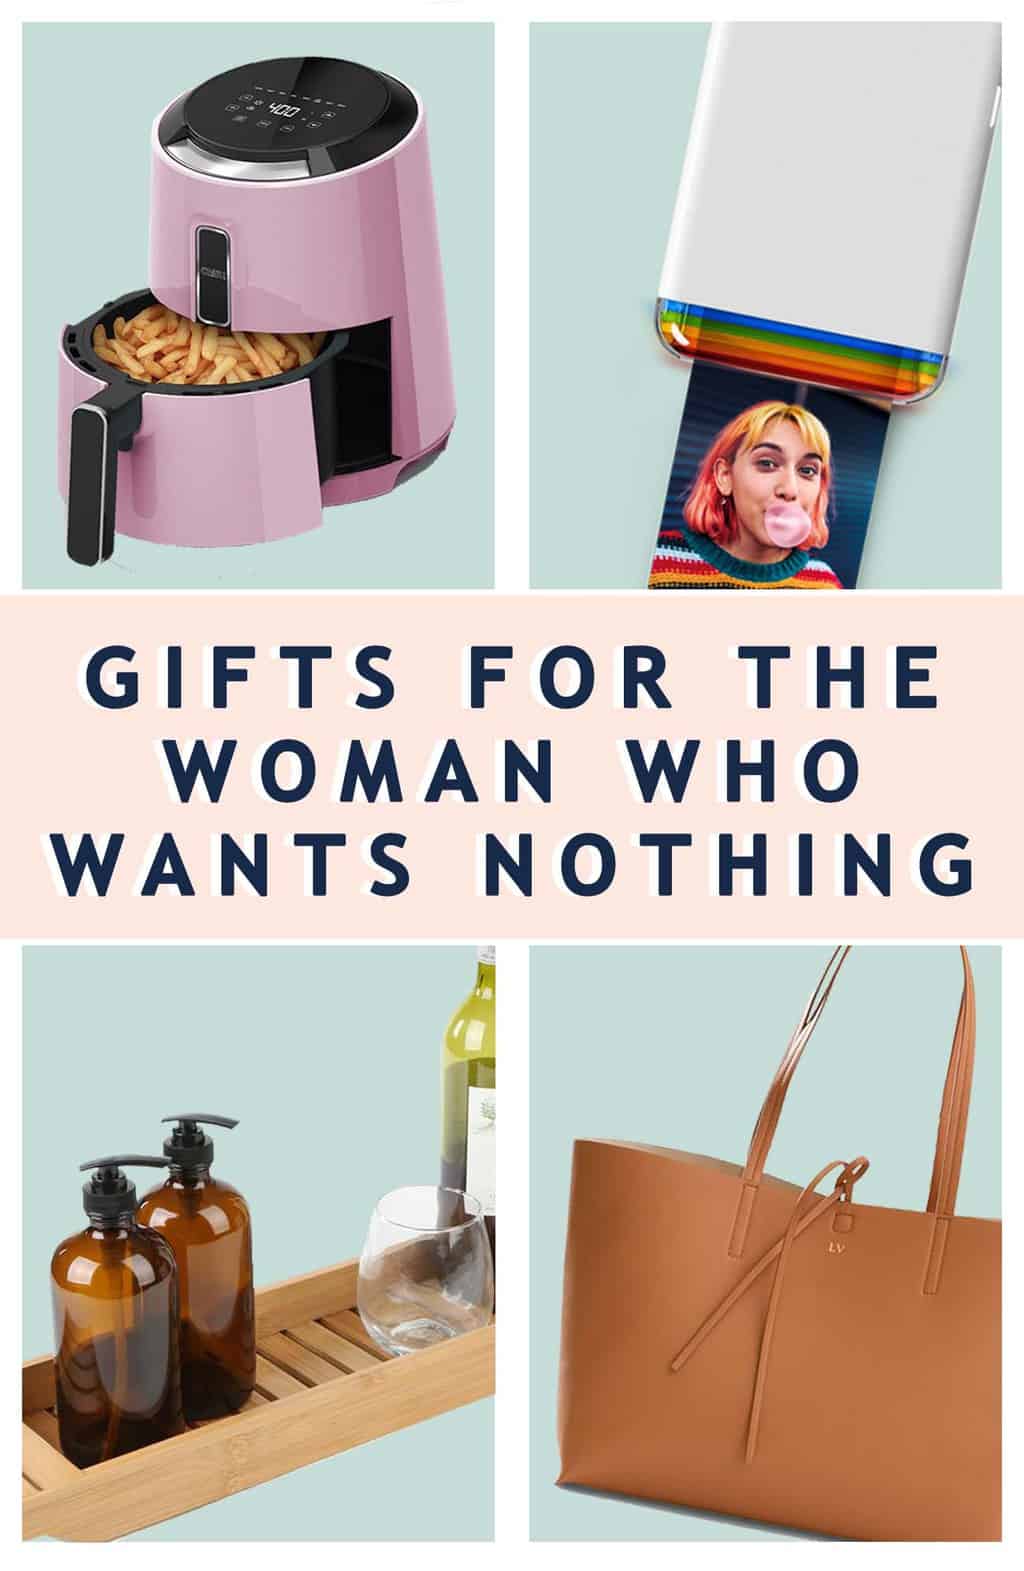 Gifts For For The Woman Who Wants Nothing - gift guide graphic